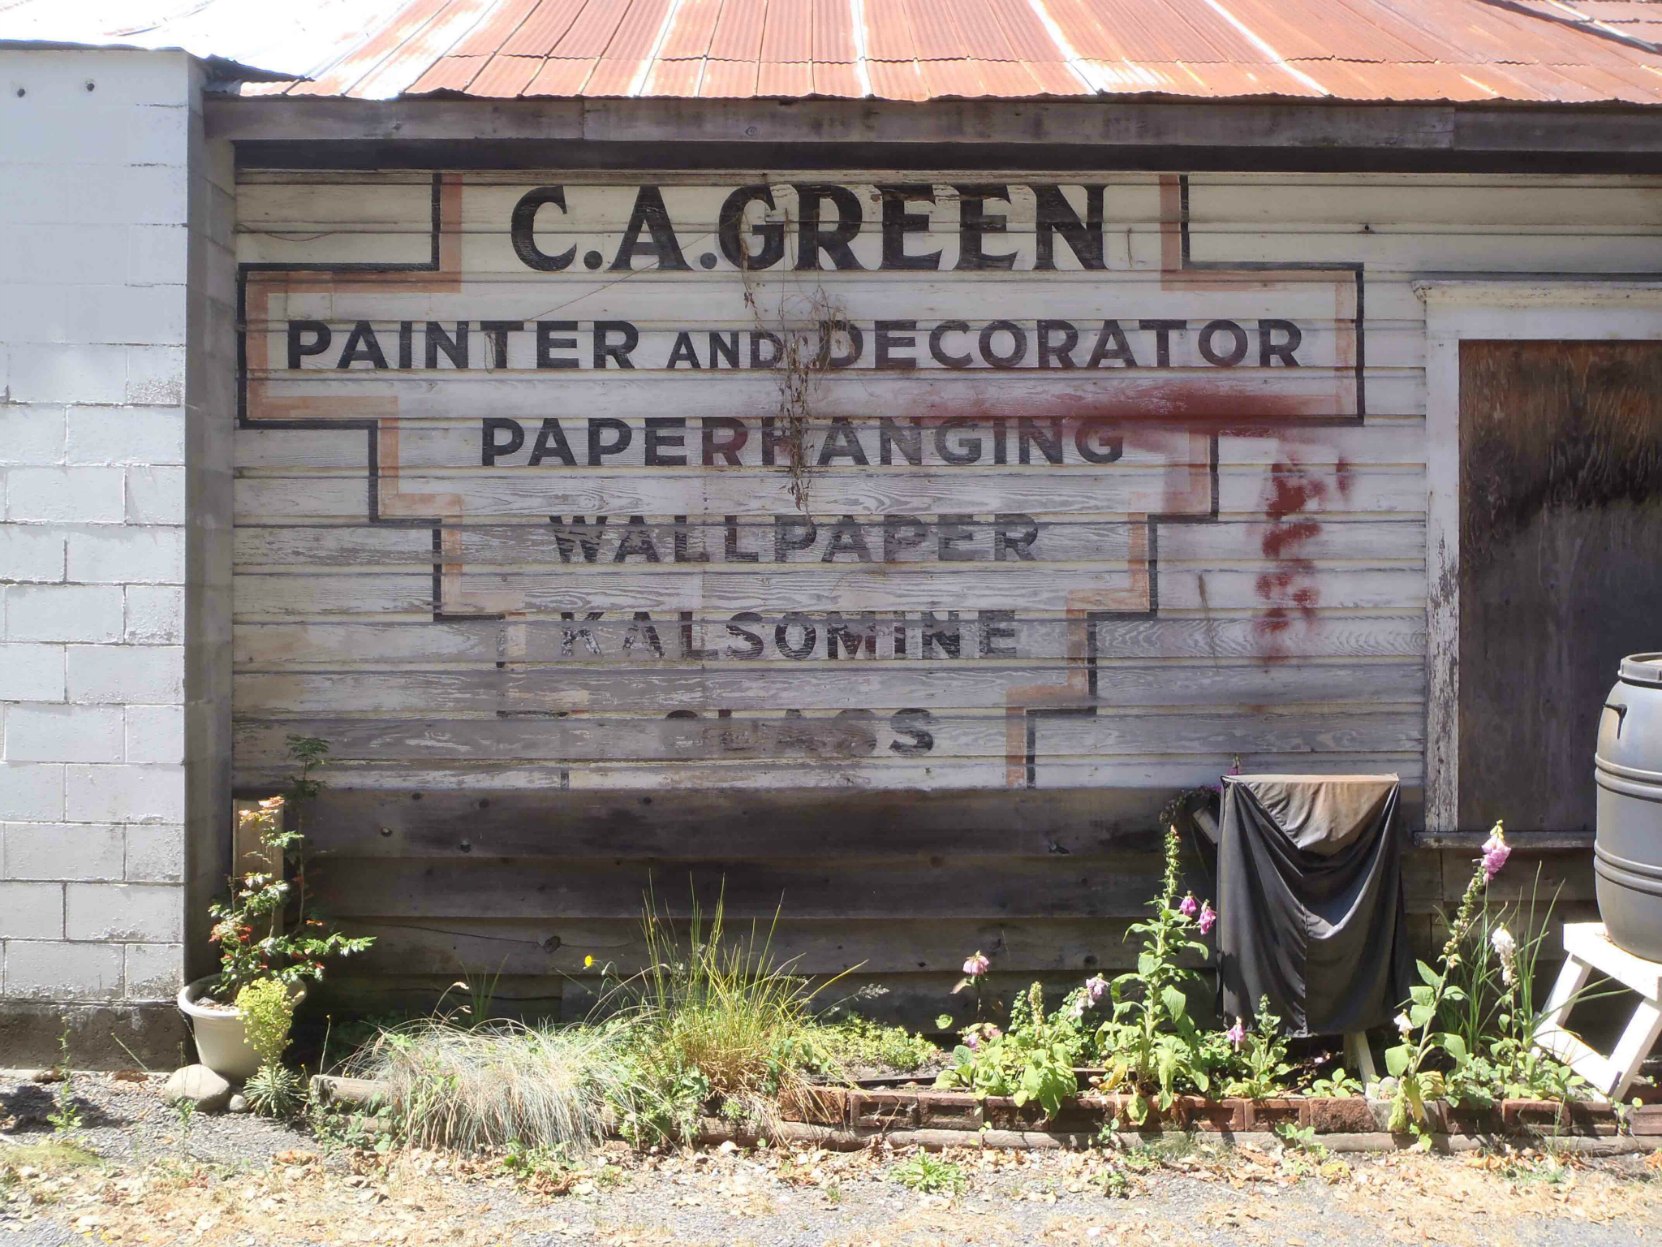 This sign, circa 1940, is still visible on the east side of 161 Kenneth Street, Claude Green's former business premises